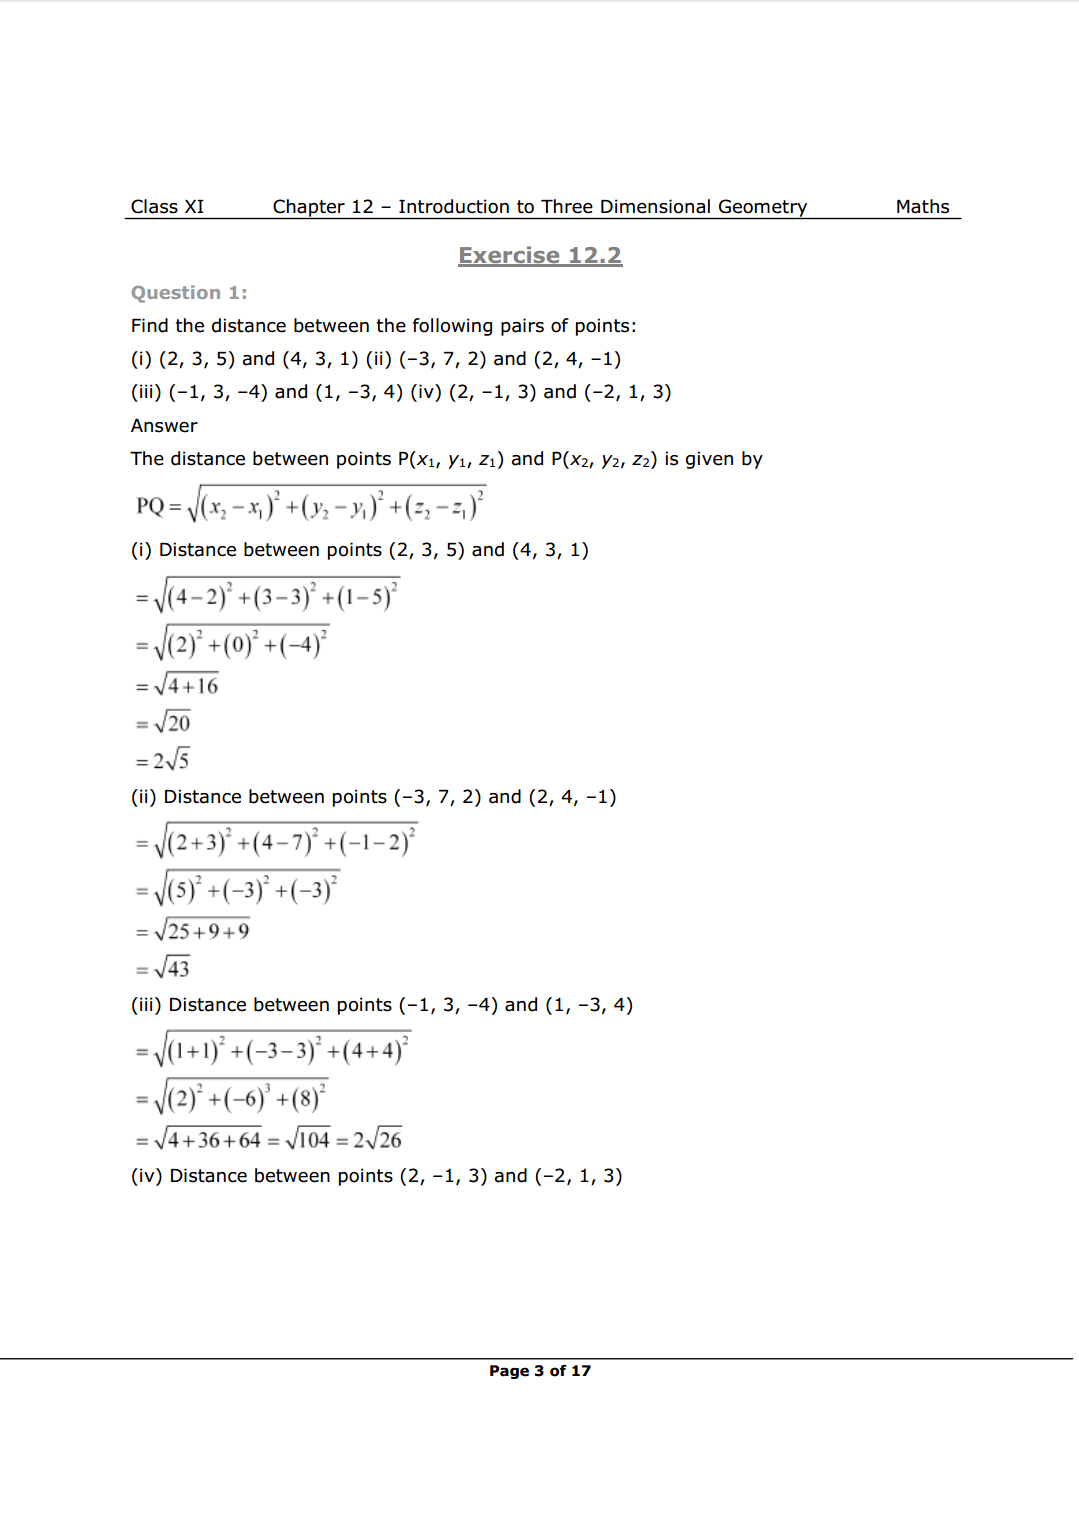 NCERT Class 11 Maths Chapter 12 Exercise 12.2 Solutions Image 1